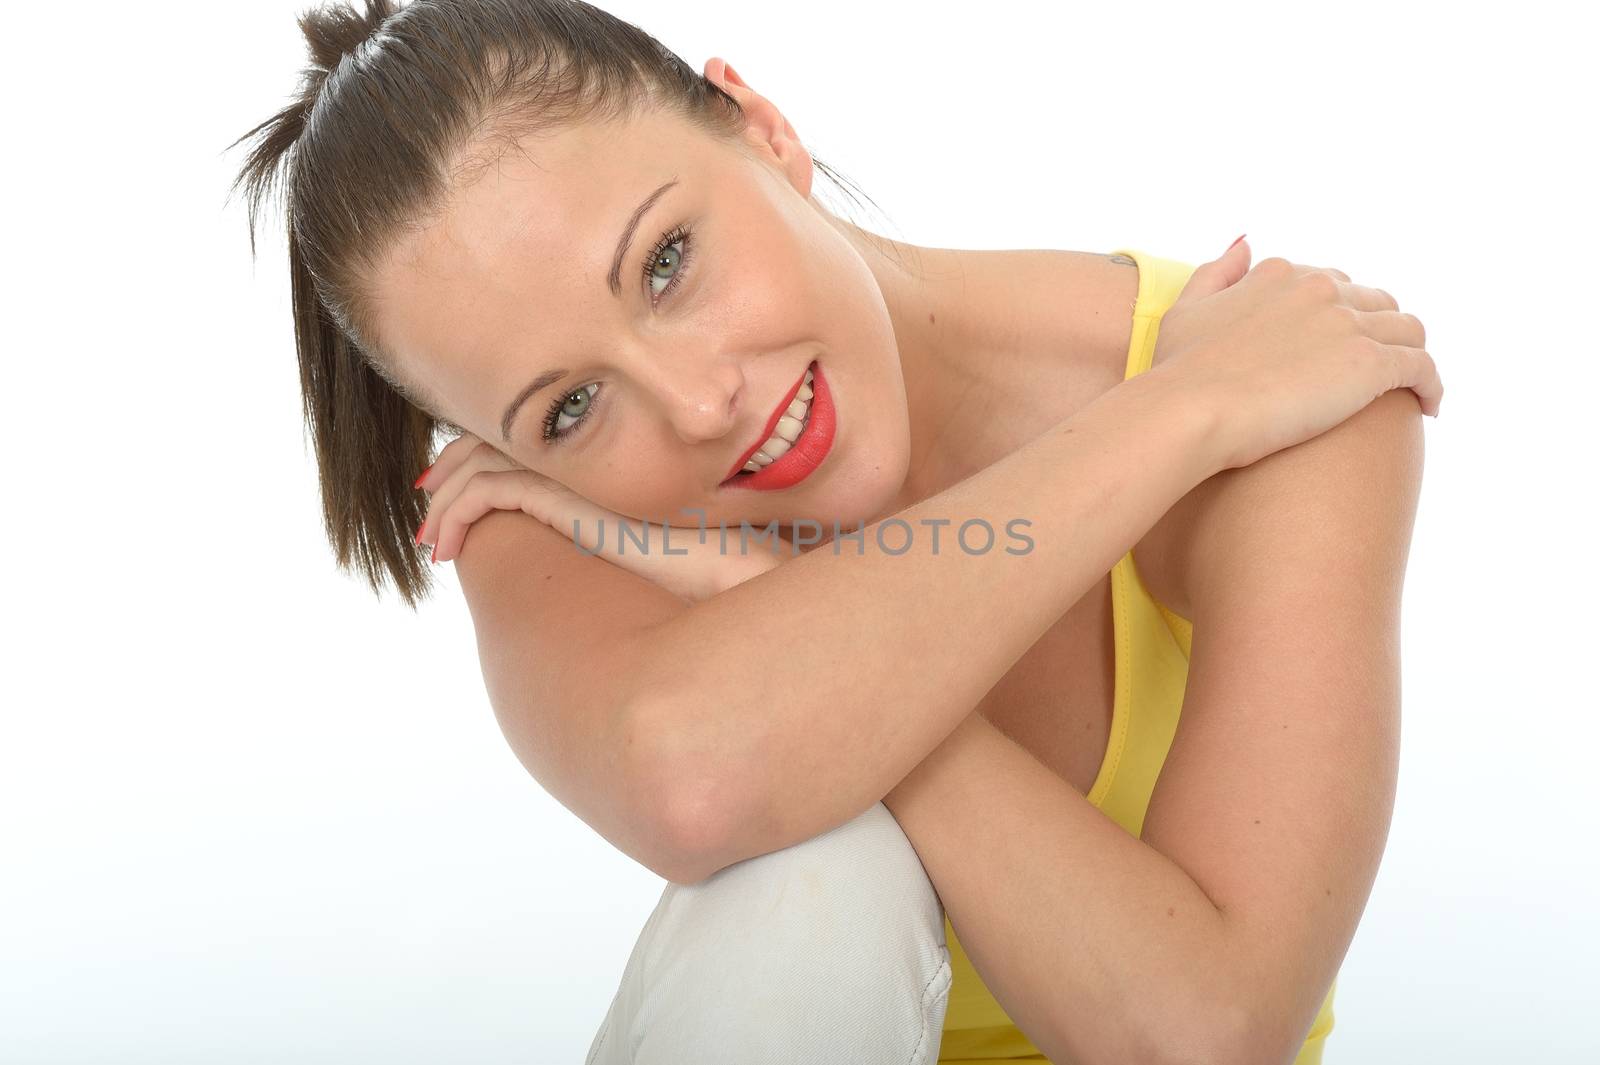 Portrait of a Very Happy Relaxed Contented Attractive Young Woman Wearing a Bright Yellow Vest Top